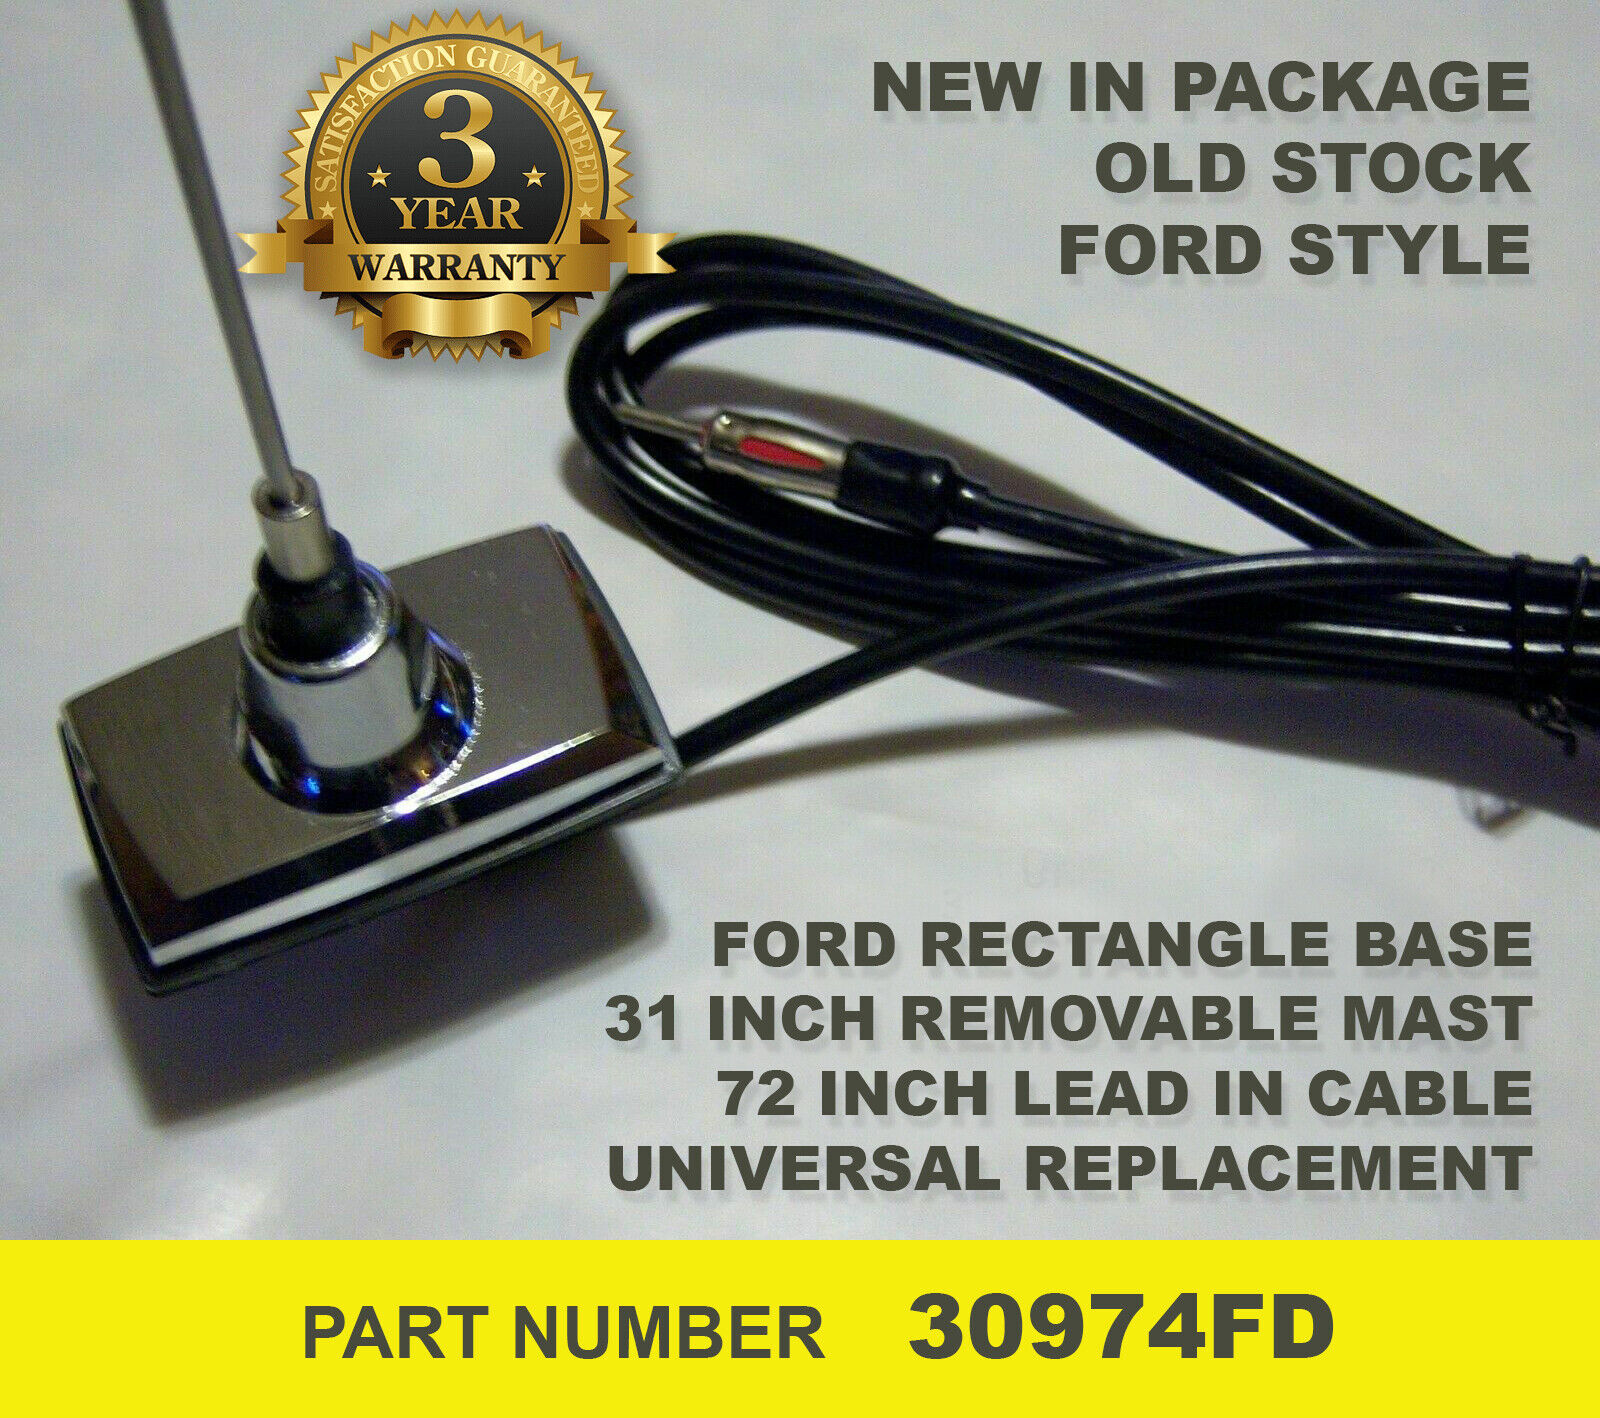 RADIO ANTENNA FORD MERCURY VINTAGE STYLE RECTANGLE BASE AM/FM REPLACEMENT NEW 